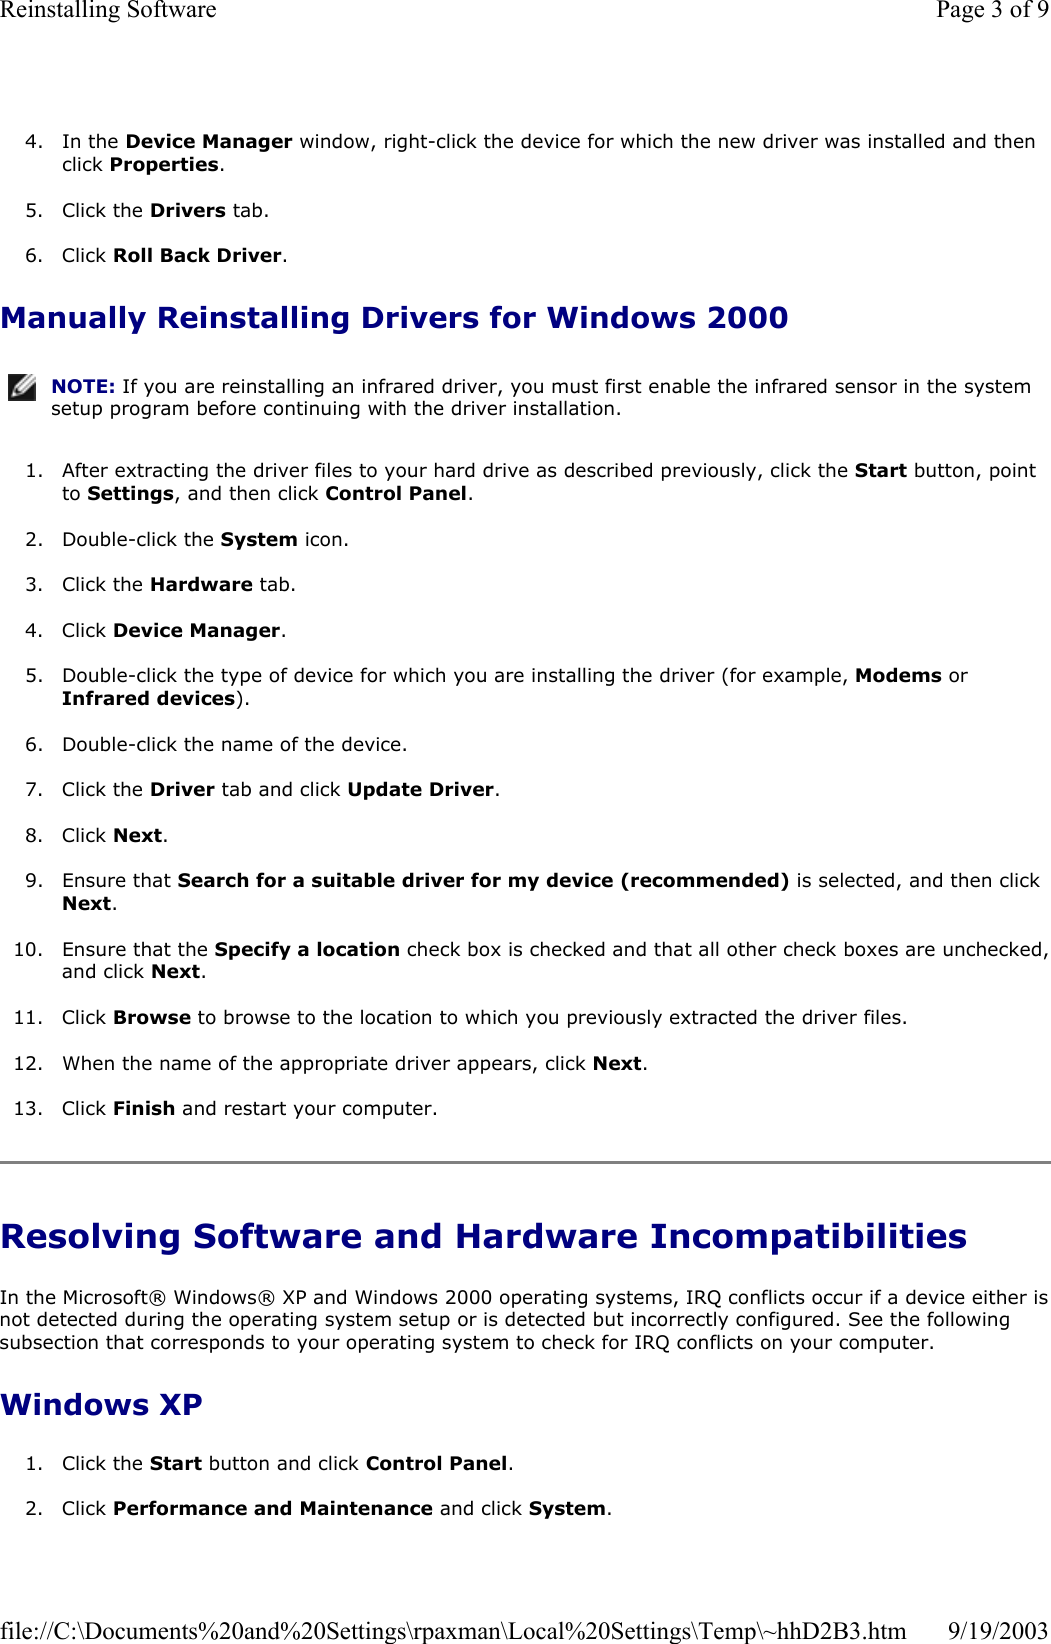  4. In the Device Manager window, right-click the device for which the new driver was installed and then click Properties.  5. Click the Drivers tab.   6. Click Roll Back Driver.  Manually Reinstalling Drivers for Windows 2000 1. After extracting the driver files to your hard drive as described previously, click the Start button, point to Settings, and then click Control Panel.  2. Double-click the System icon.  3. Click the Hardware tab.  4. Click Device Manager.  5. Double-click the type of device for which you are installing the driver (for example, Modems or Infrared devices).  6. Double-click the name of the device.  7. Click the Driver tab and click Update Driver.  8. Click Next.  9. Ensure that Search for a suitable driver for my device (recommended) is selected, and then click Next.  10. Ensure that the Specify a location check box is checked and that all other check boxes are unchecked,and click Next.  11. Click Browse to browse to the location to which you previously extracted the driver files.  12. When the name of the appropriate driver appears, click Next.  13. Click Finish and restart your computer.  Resolving Software and Hardware Incompatibilities In the Microsoft® Windows® XP and Windows 2000 operating systems, IRQ conflicts occur if a device either isnot detected during the operating system setup or is detected but incorrectly configured. See the following subsection that corresponds to your operating system to check for IRQ conflicts on your computer. Windows XP 1. Click the Start button and click Control Panel.   2. Click Performance and Maintenance and click System.  NOTE: If you are reinstalling an infrared driver, you must first enable the infrared sensor in the system setup program before continuing with the driver installation.Page 3 of 9Reinstalling Software9/19/2003file://C:\Documents%20and%20Settings\rpaxman\Local%20Settings\Temp\~hhD2B3.htm